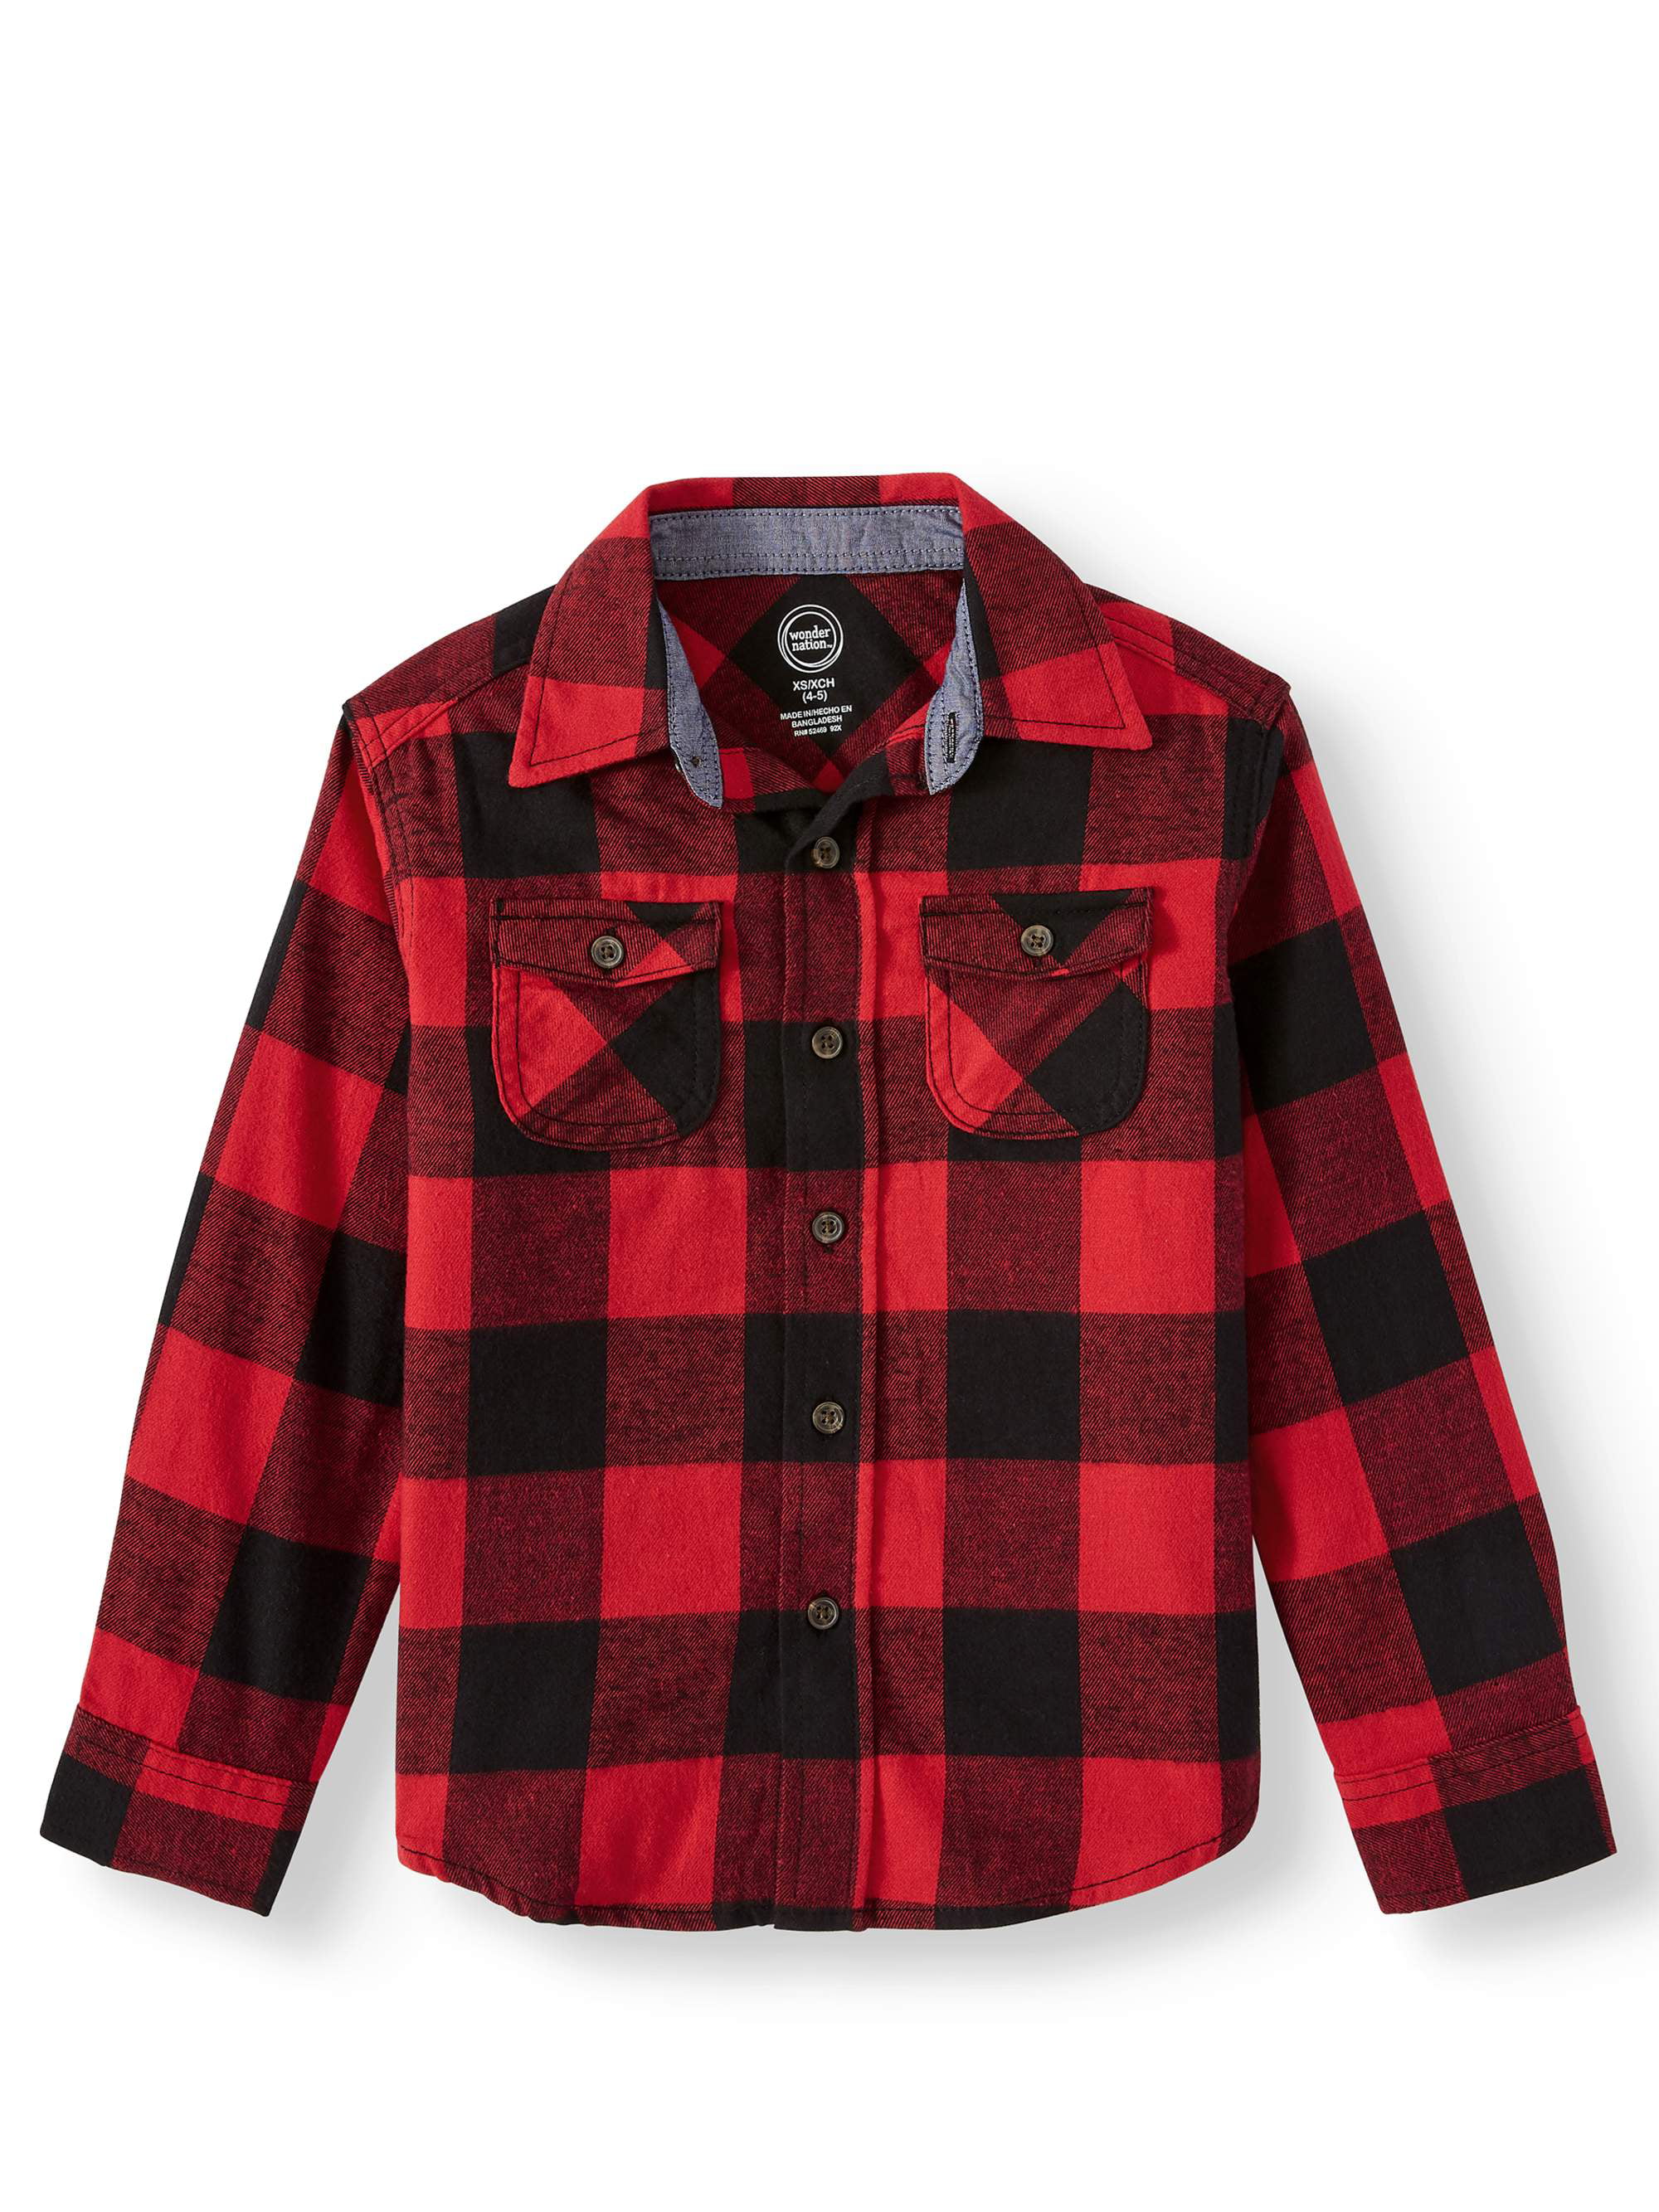 Unisex Toddler Kids Baby Girls Boys Red Printed Plaid Shirt Long Sleeve Tops Casual Clothes